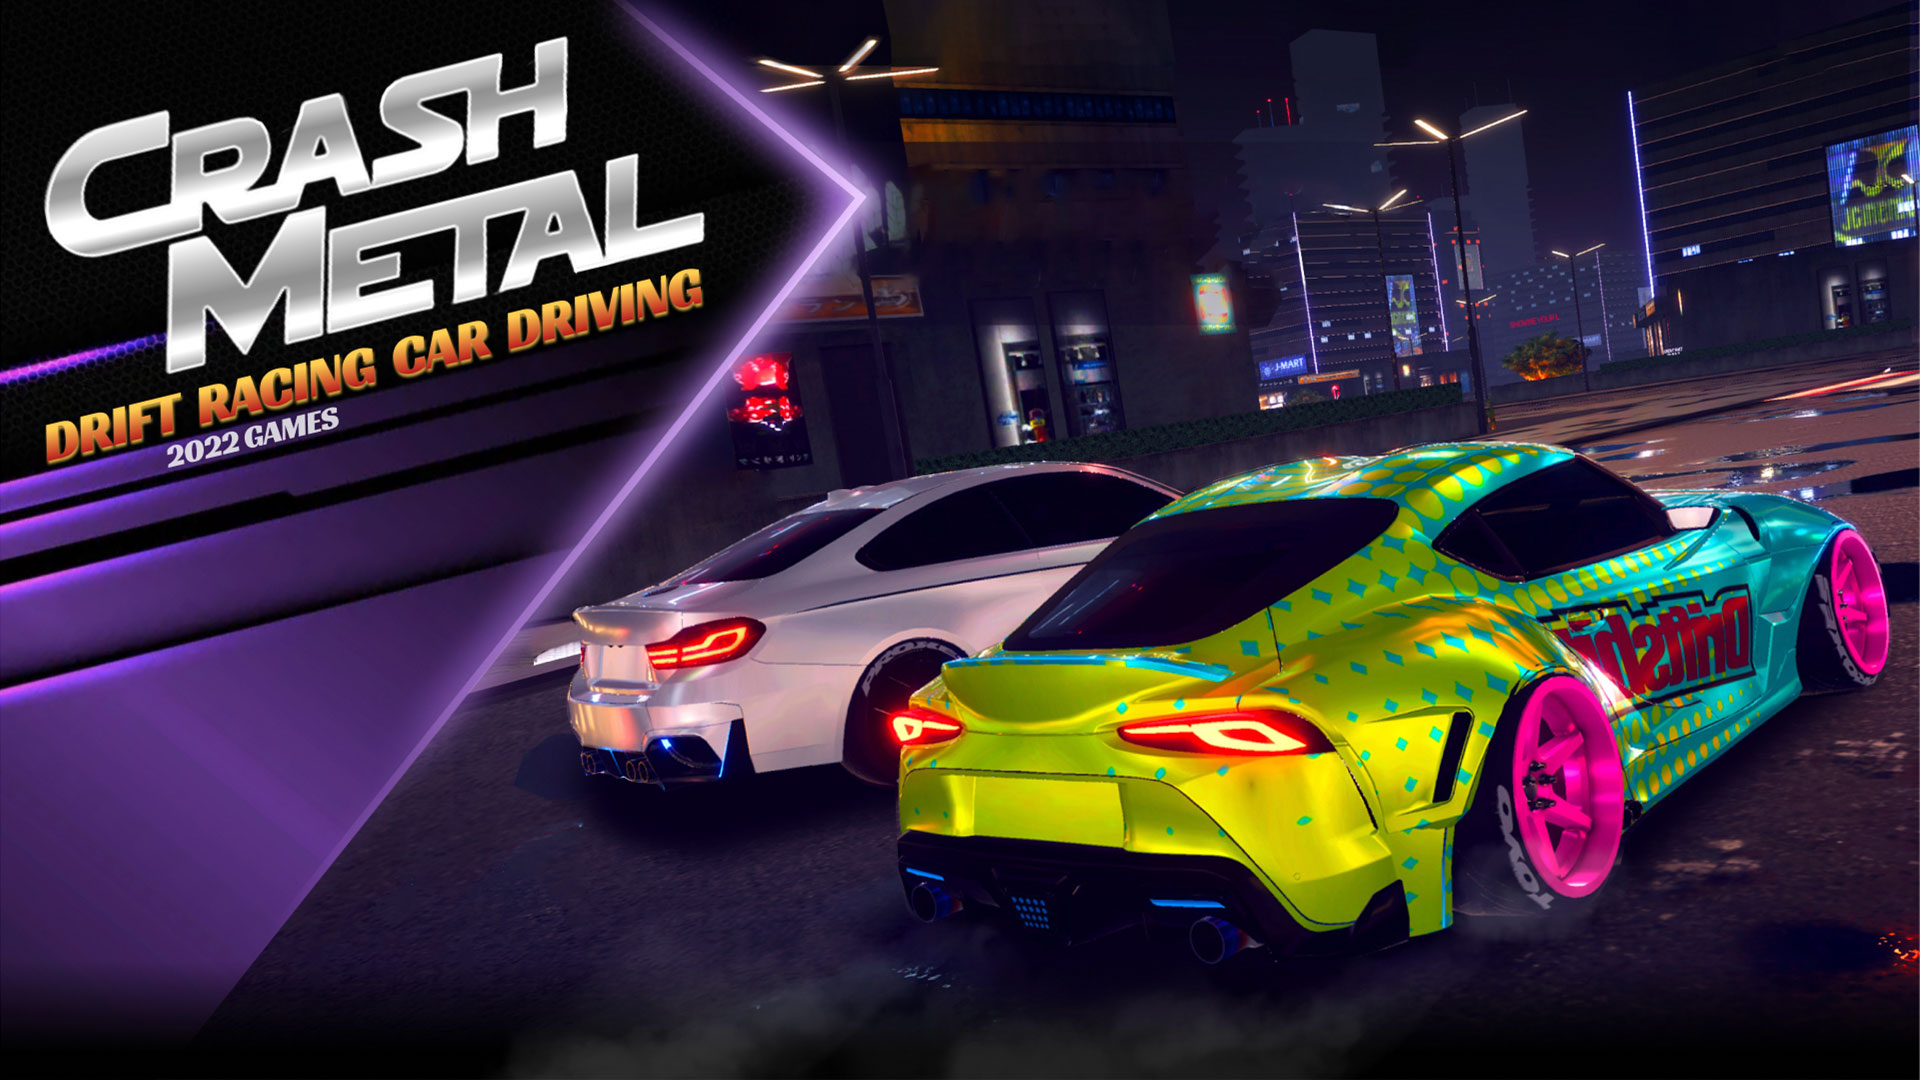 Epic Car Racer Action Driving Simulator - Turbo Drift Car Racing with  Extreme City Car Driving Simulator - Super Fast Auto Real Car Racing Game  Online - Grand Track Auto V Game 